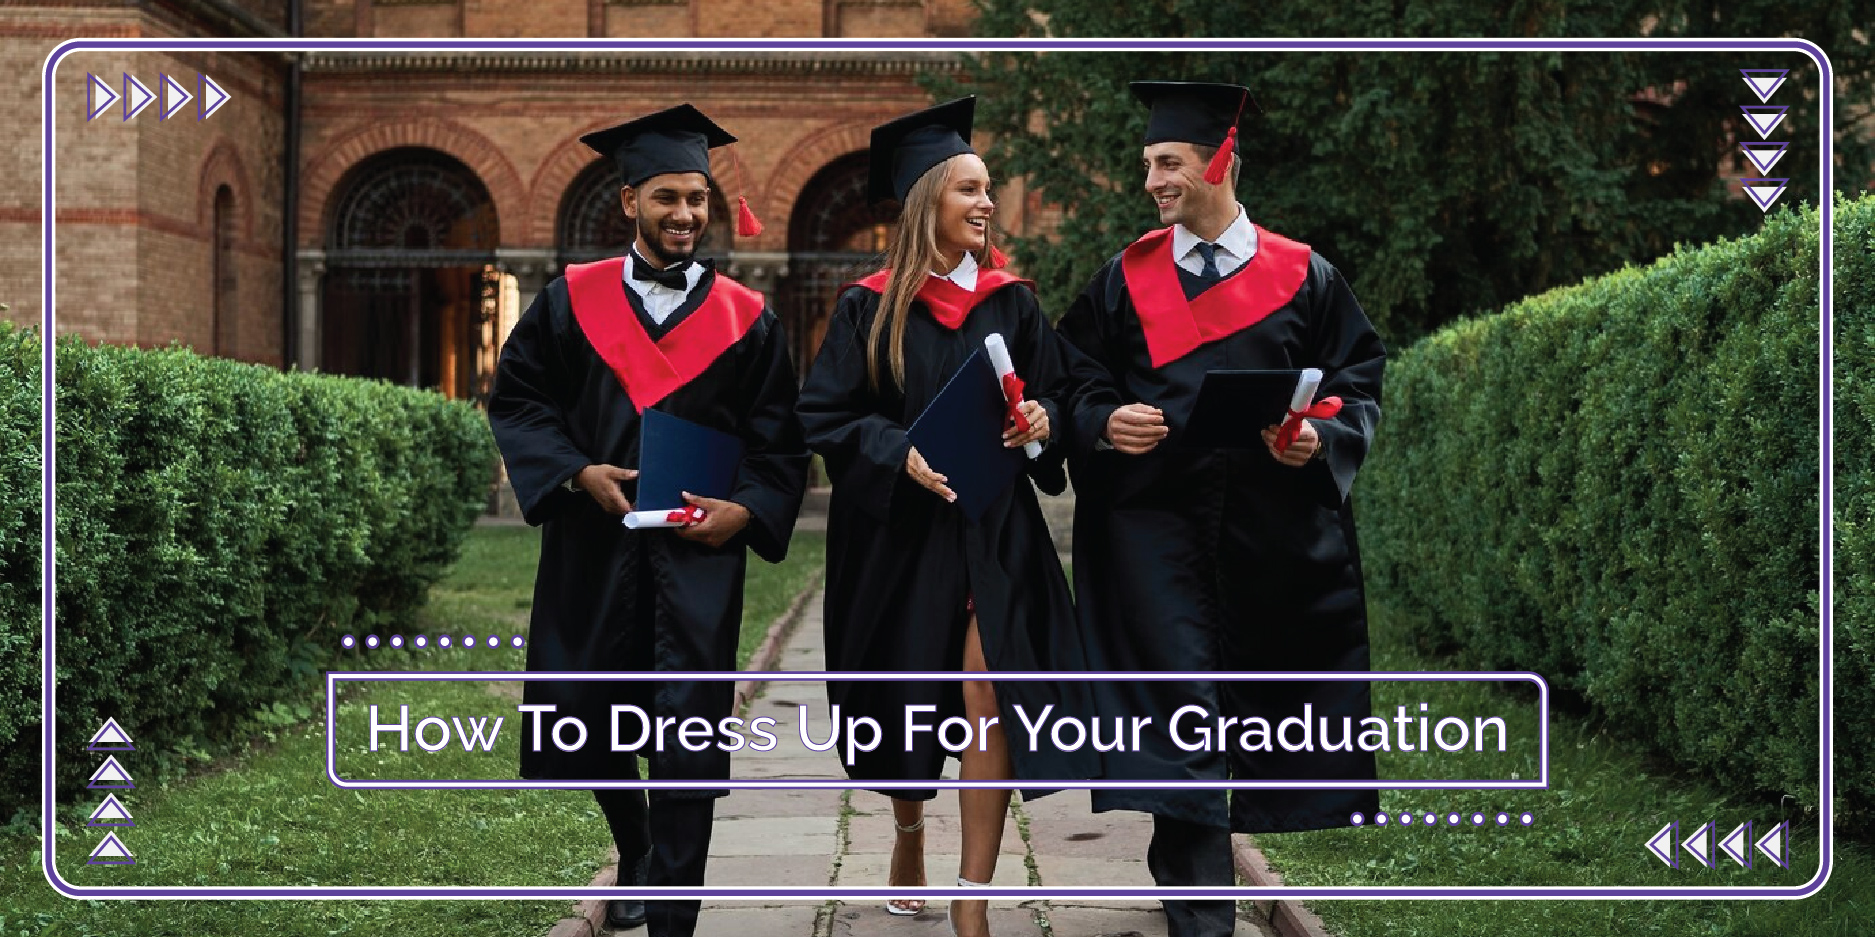 How To Dress Up For Your Graduation